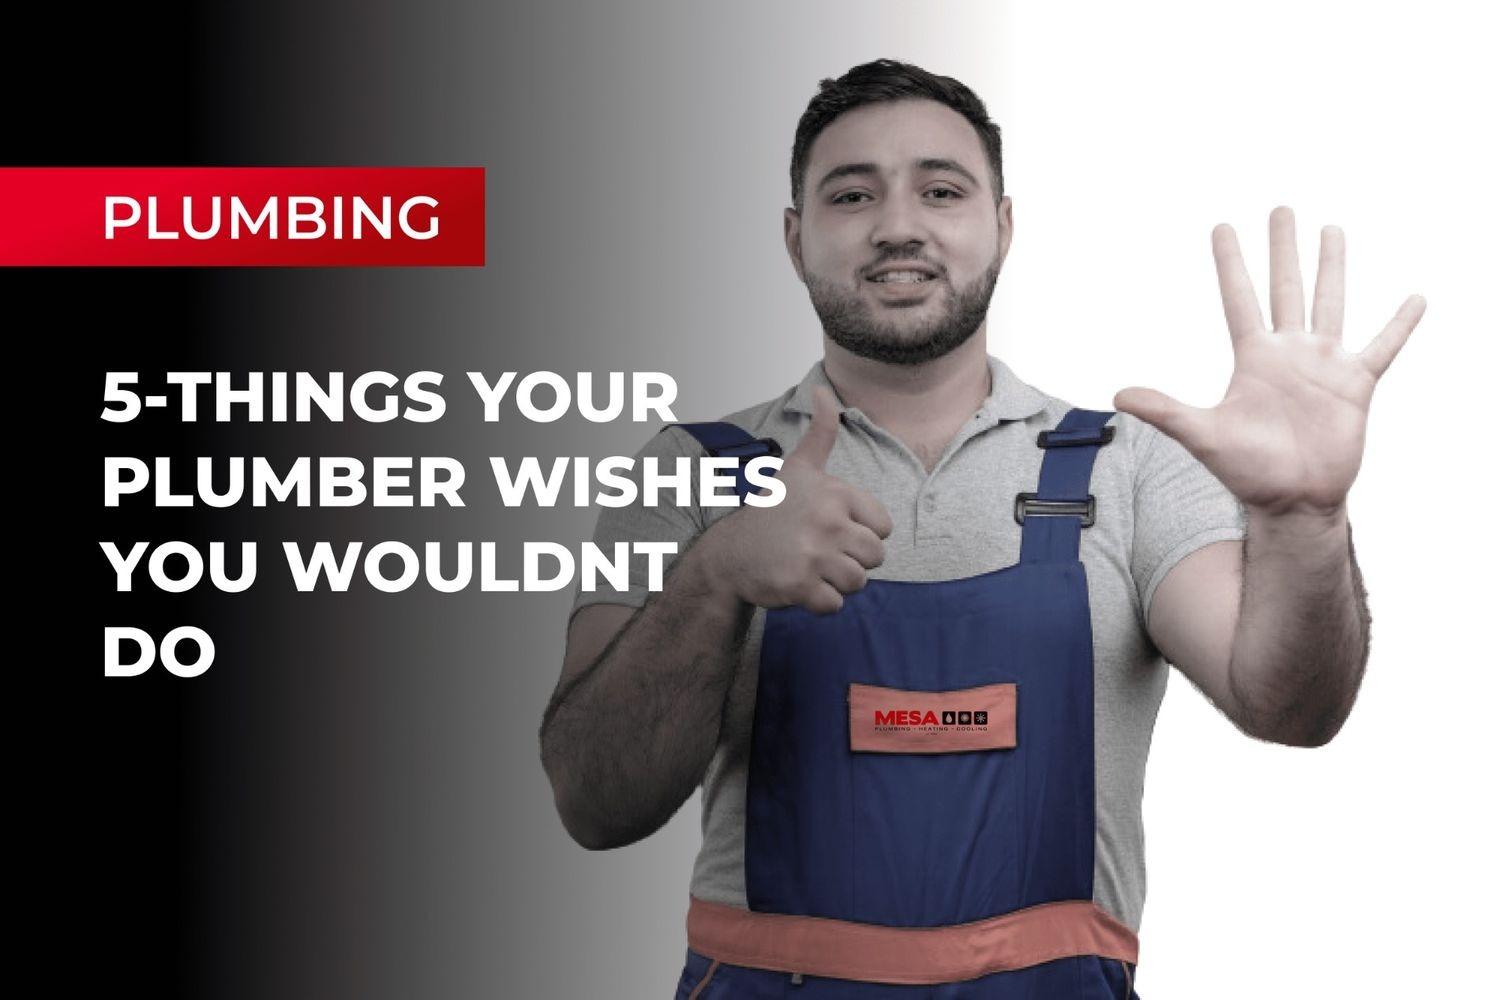 5 Things Your Plumber Wishes You Wouldn’t Do